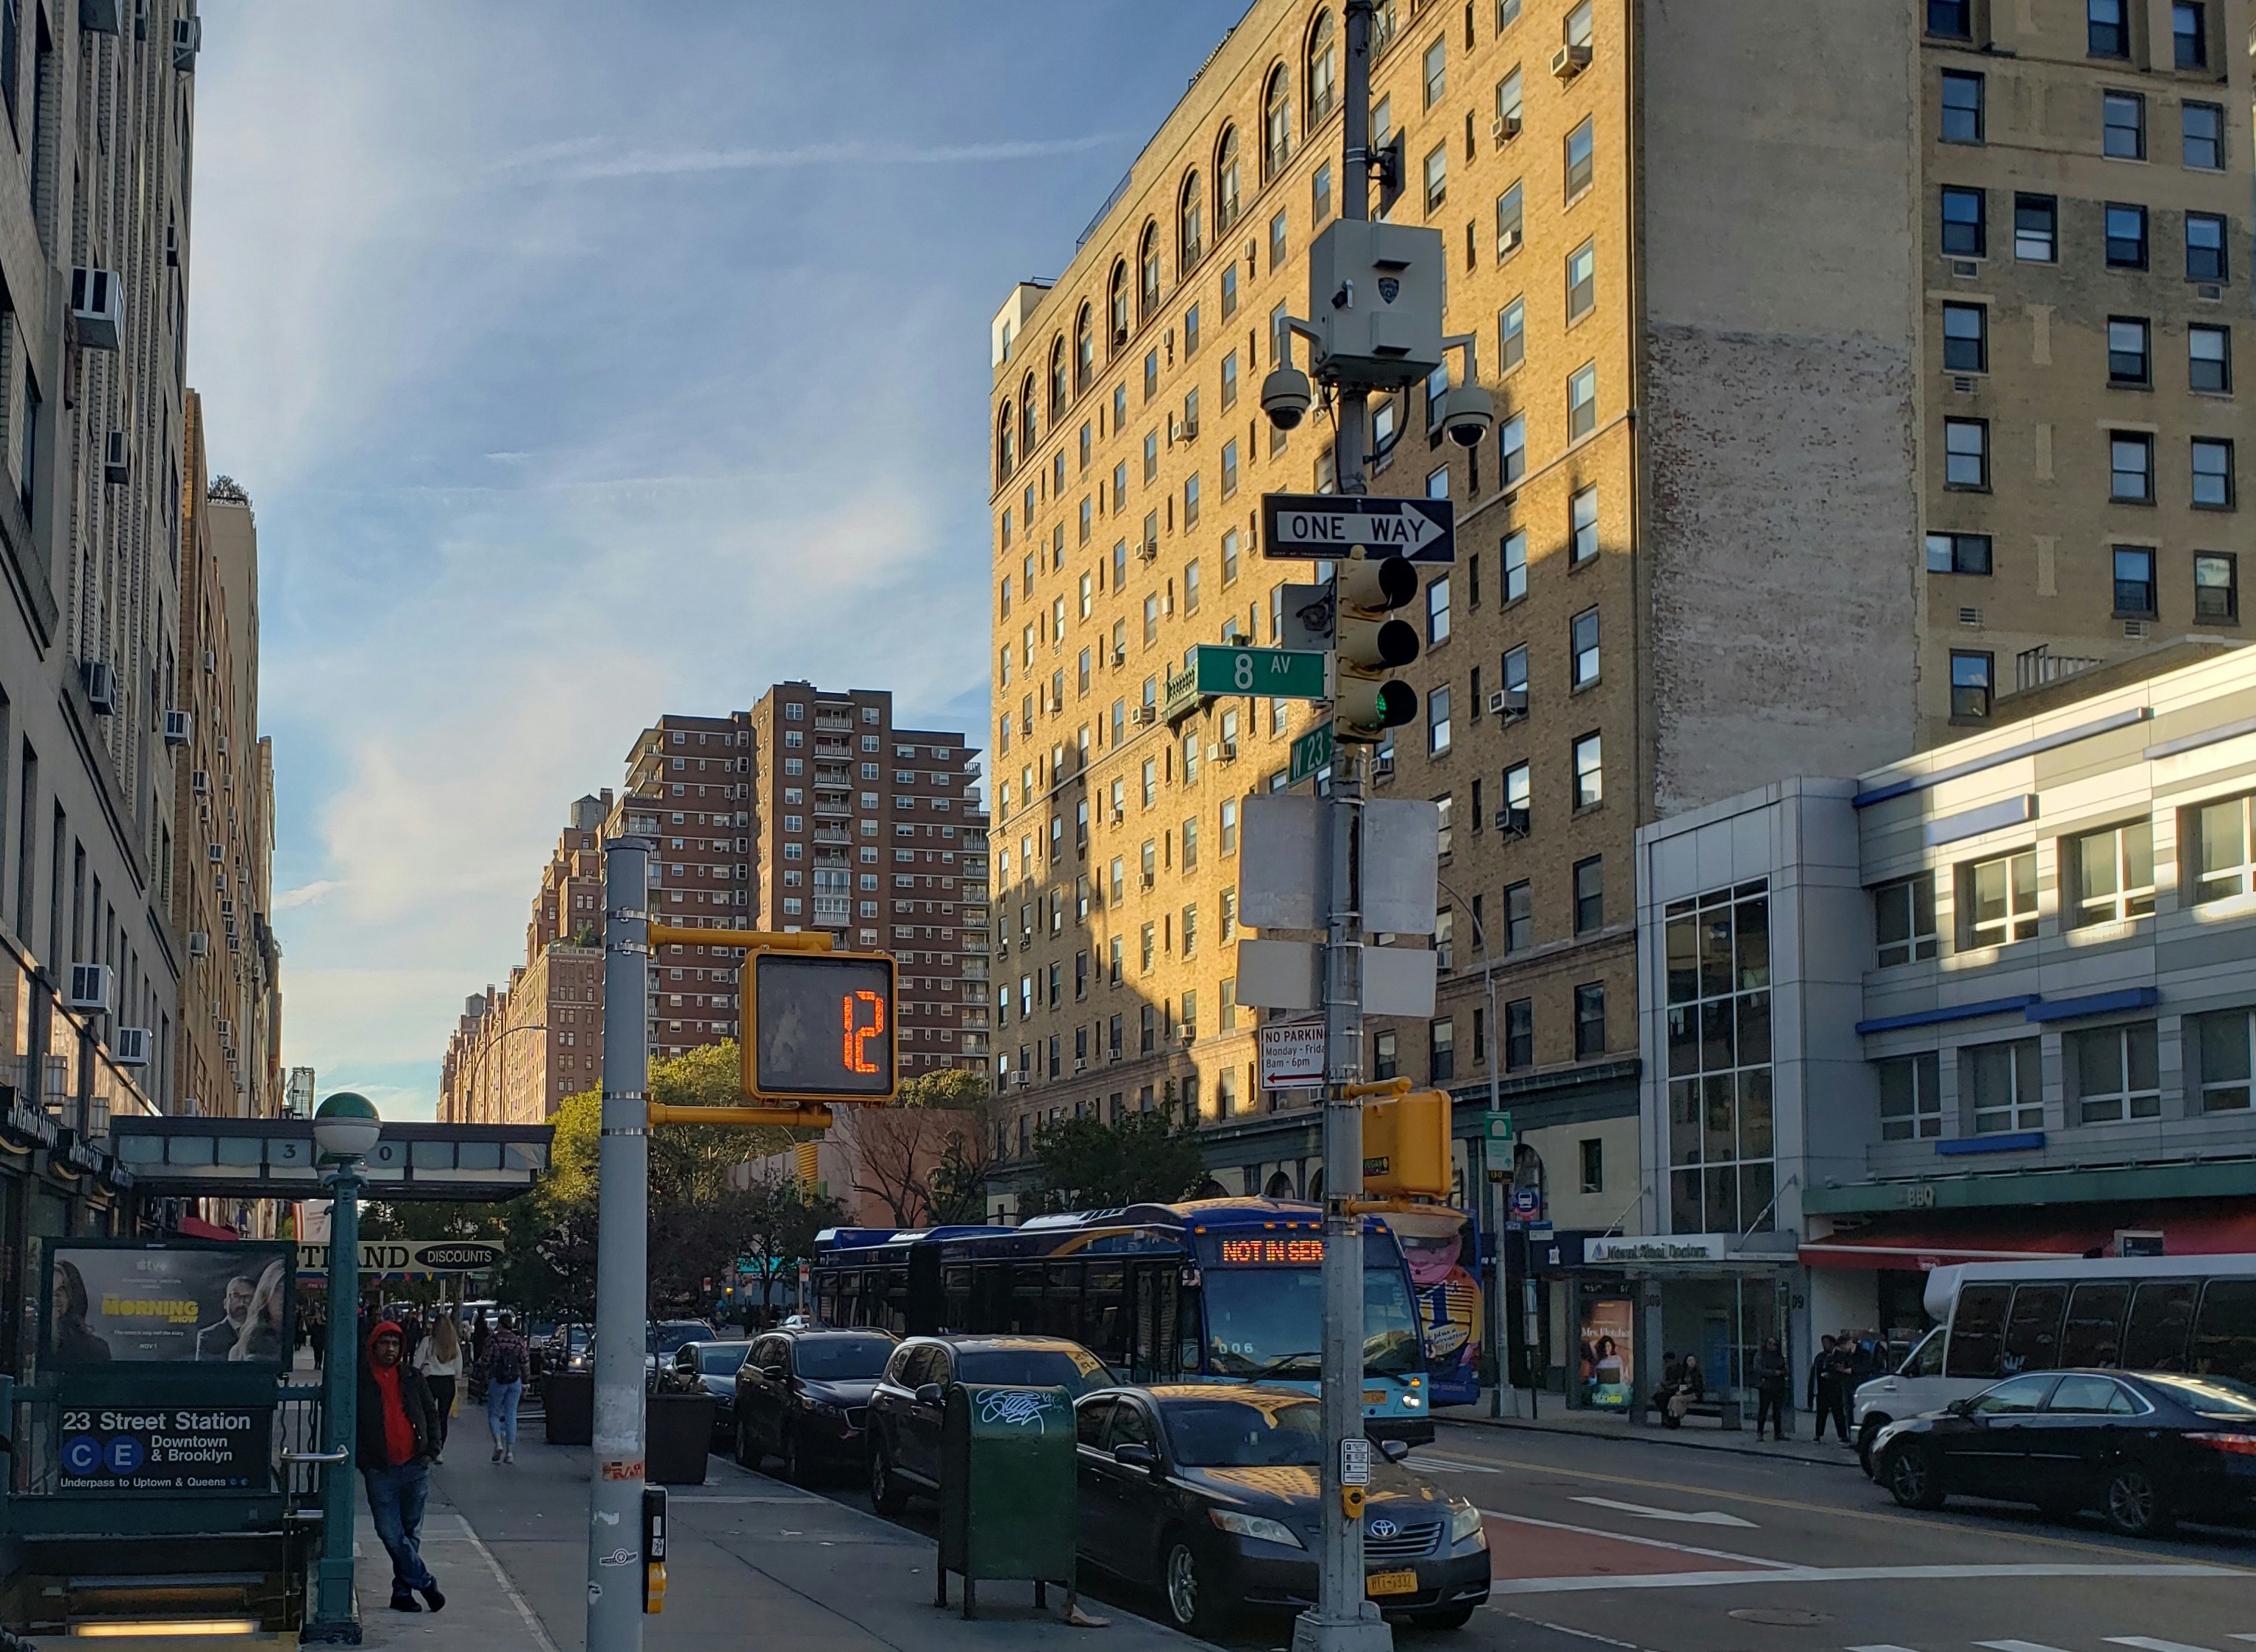 The yellow brick buildings at the corner of 23rd and 8th in New York City glow golden in the afternoon light, overlooking a subway station where a man is leaning on the railing, an out-of-service blue bus, and a row of black cars parallel parked on the street